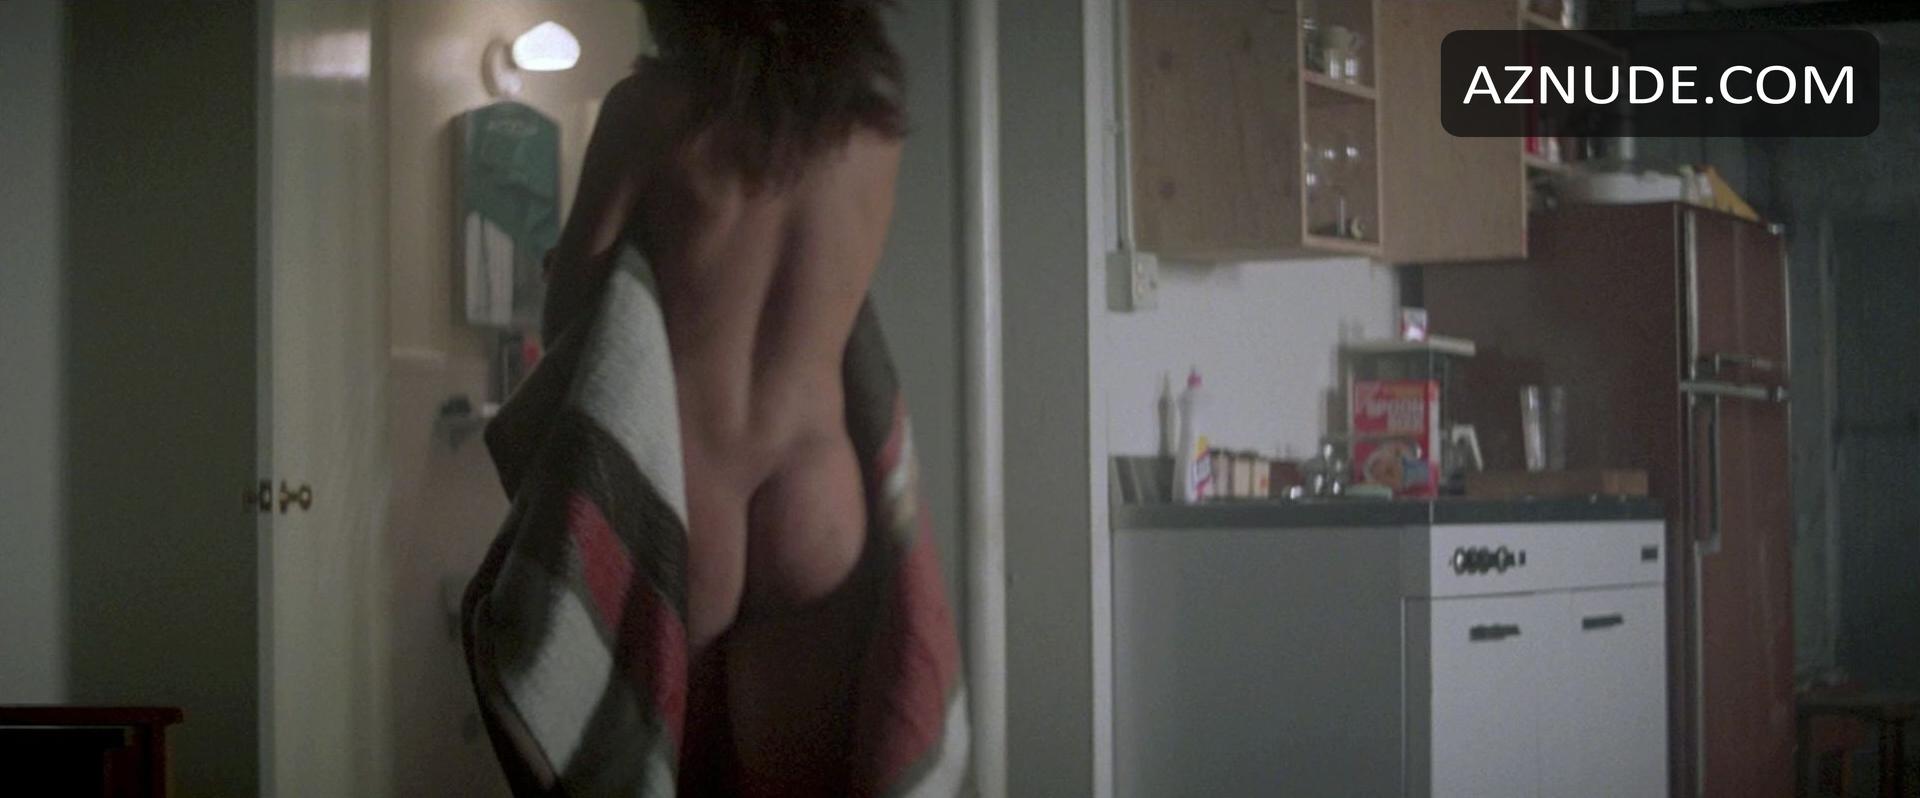 Tracy reed topless